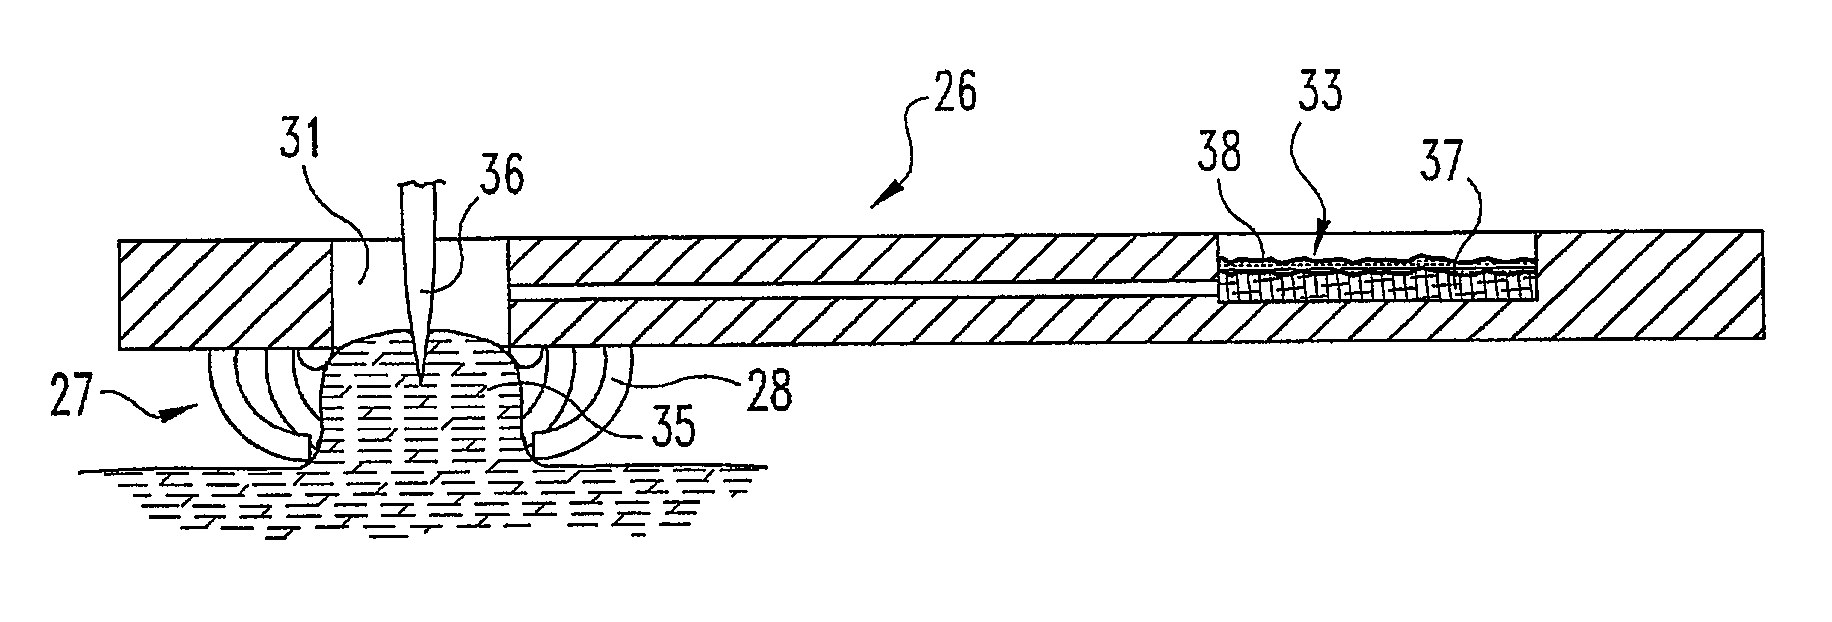 Devices and methods for expression of bodily fluids from an incision